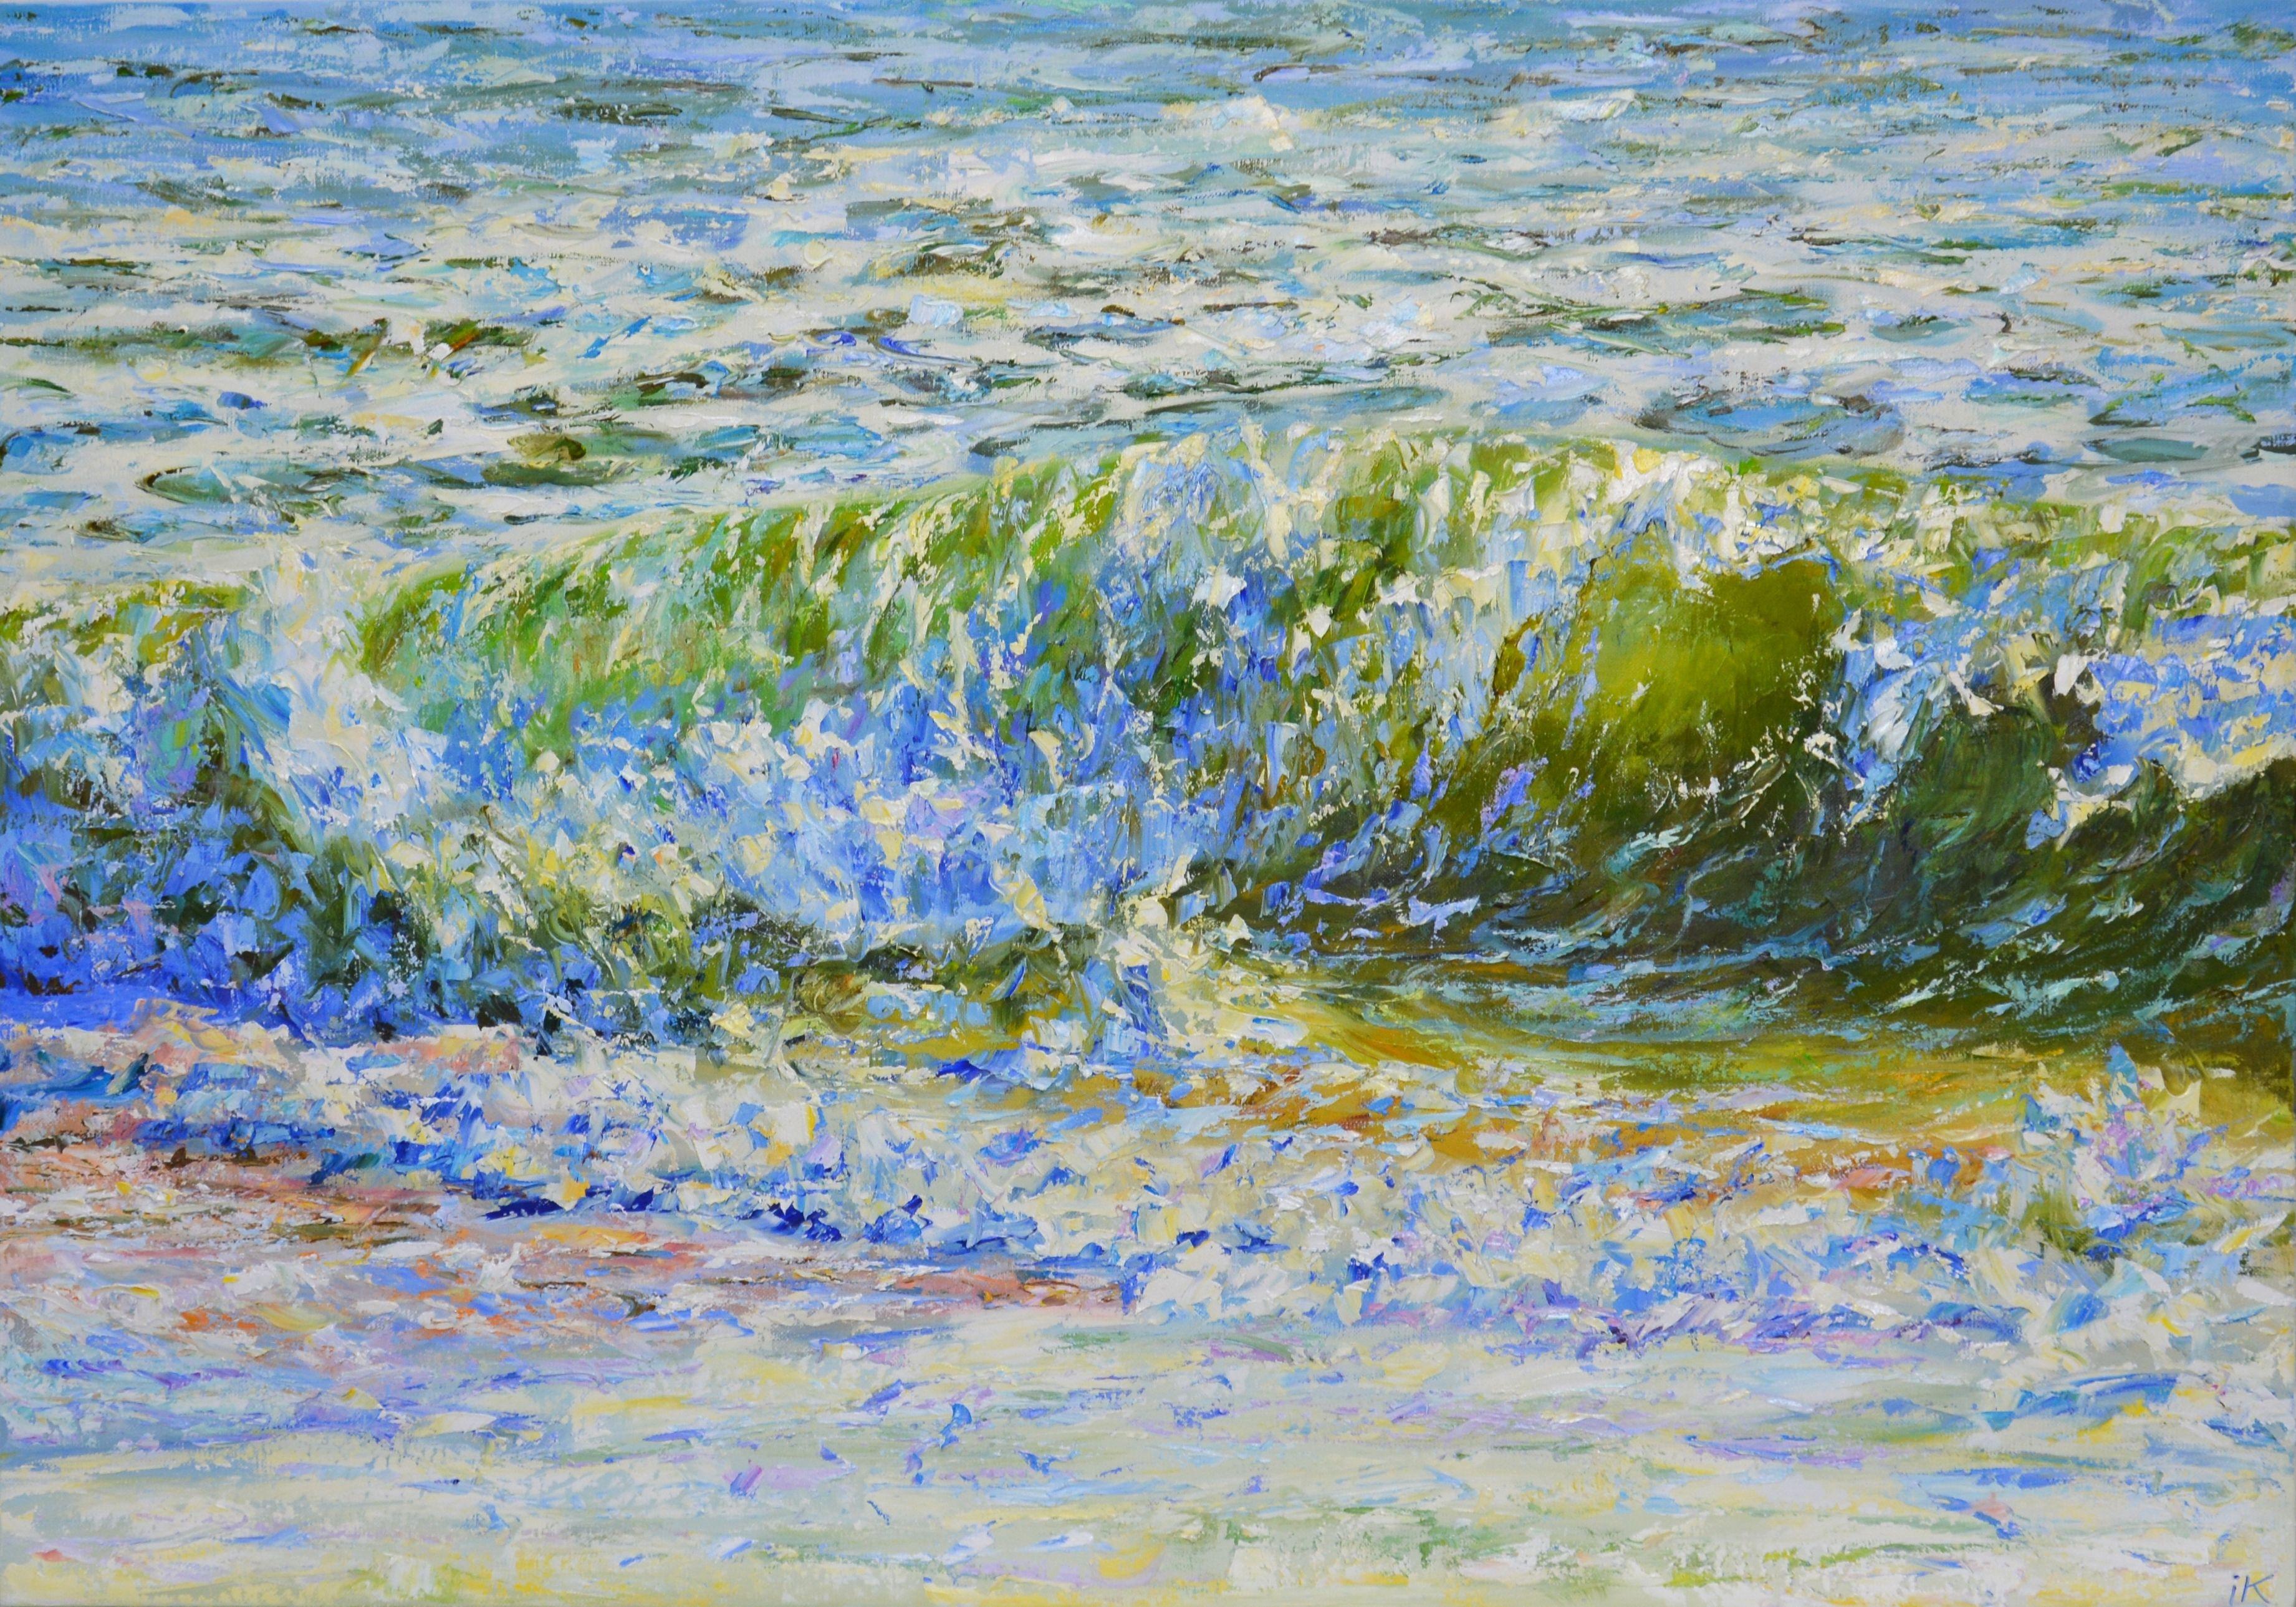 Bright daylight reflects off the rolling waves, creating an almost abstract composition. The expressive work of the palette knife and the rich palette of white, light green and ultramarine emphasize the warm radiance of the sun and the movement of